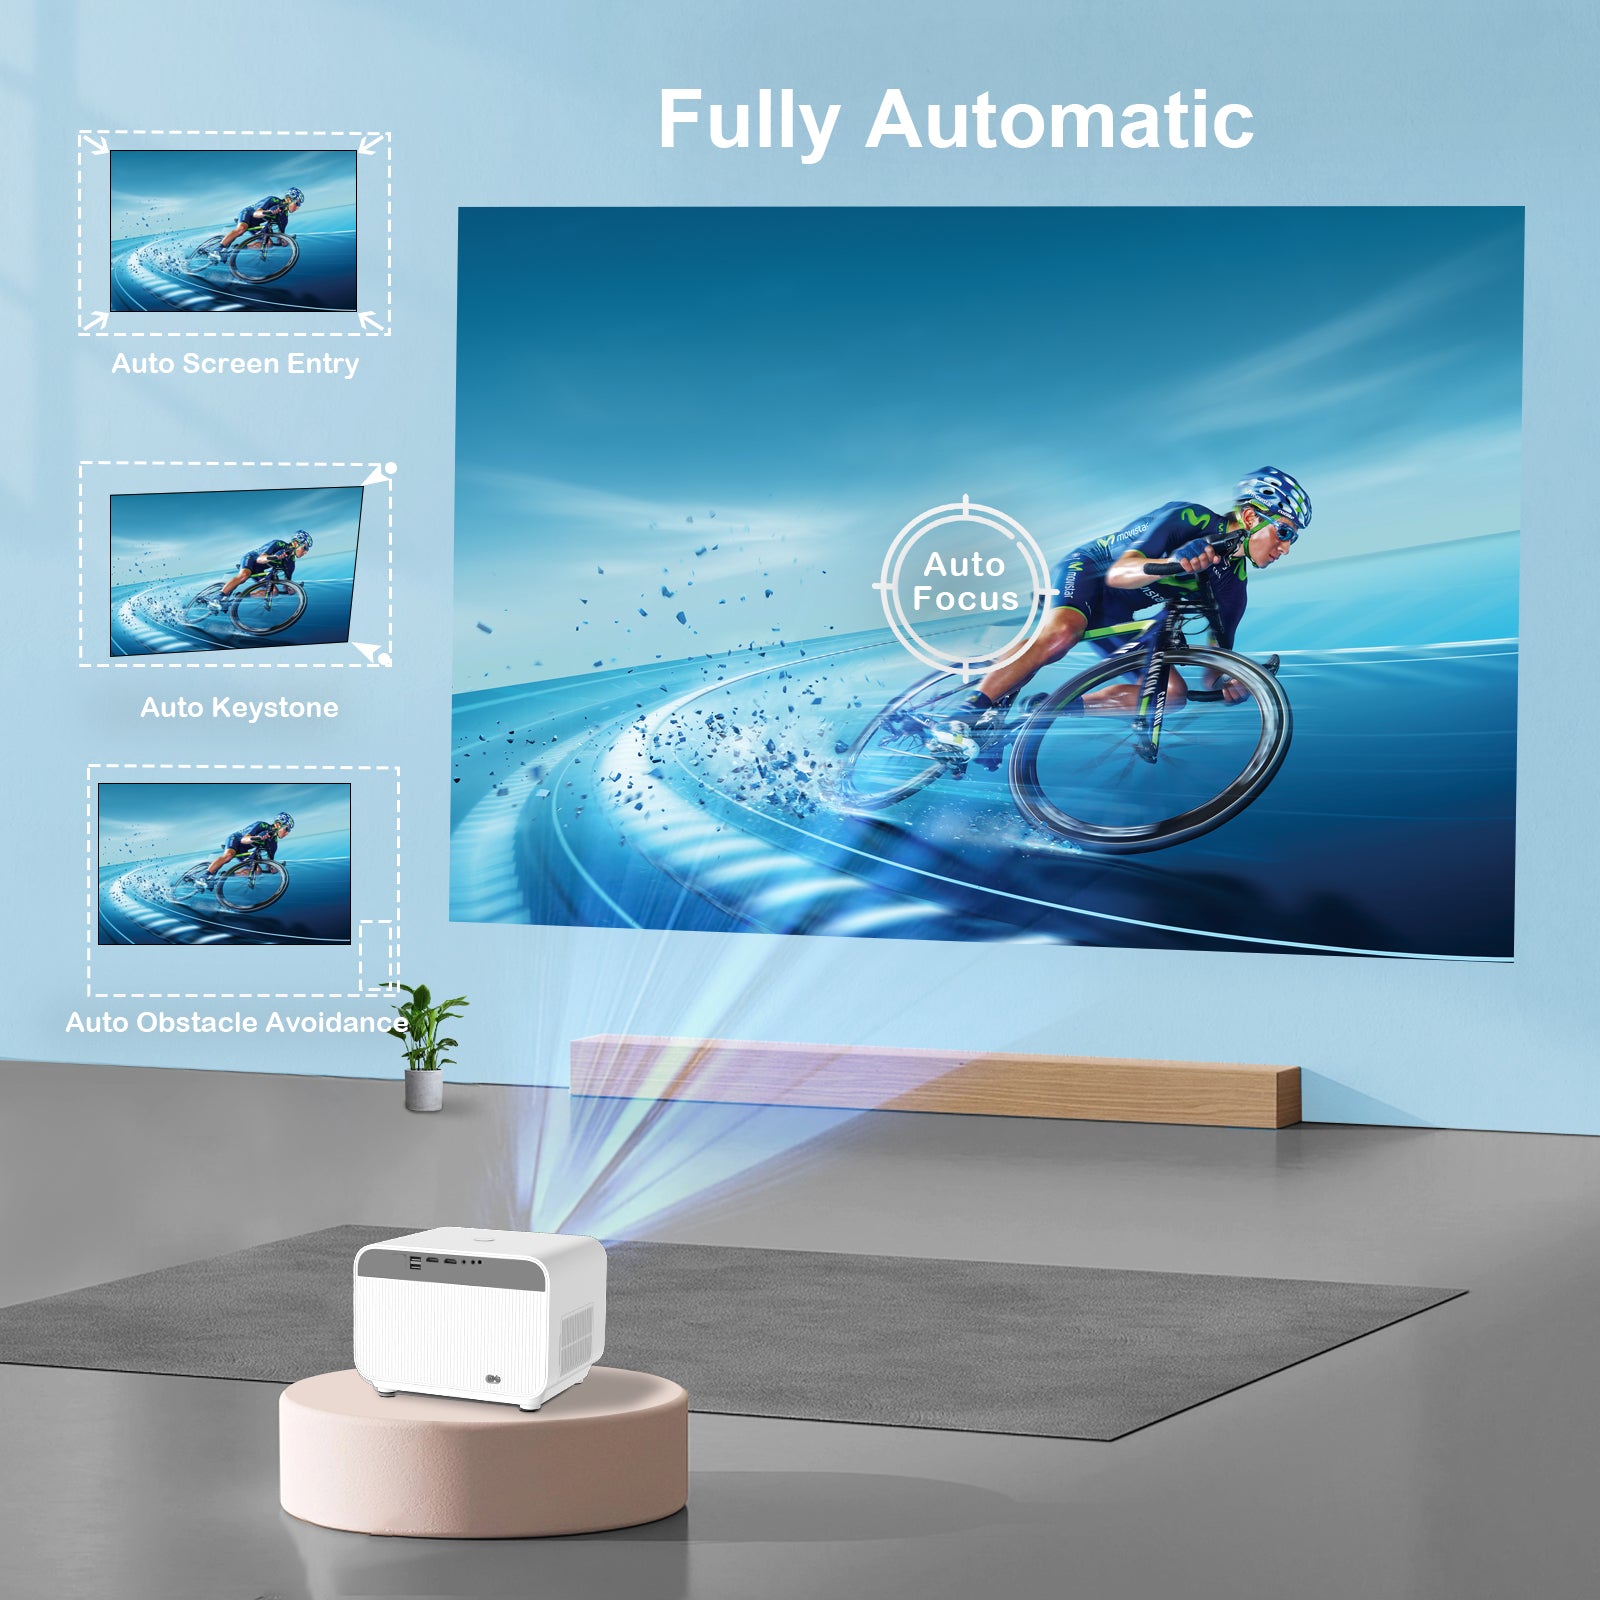 【Four Autos&App Store】FunFlix A1 Android TV Projector 4K with WiFi and Bluetooth,Smart Projector with Auto Focus&Keystone&Screen Entry&Obstacle Avoidance,700 ANSI Outdoor Projector with Apps Built in